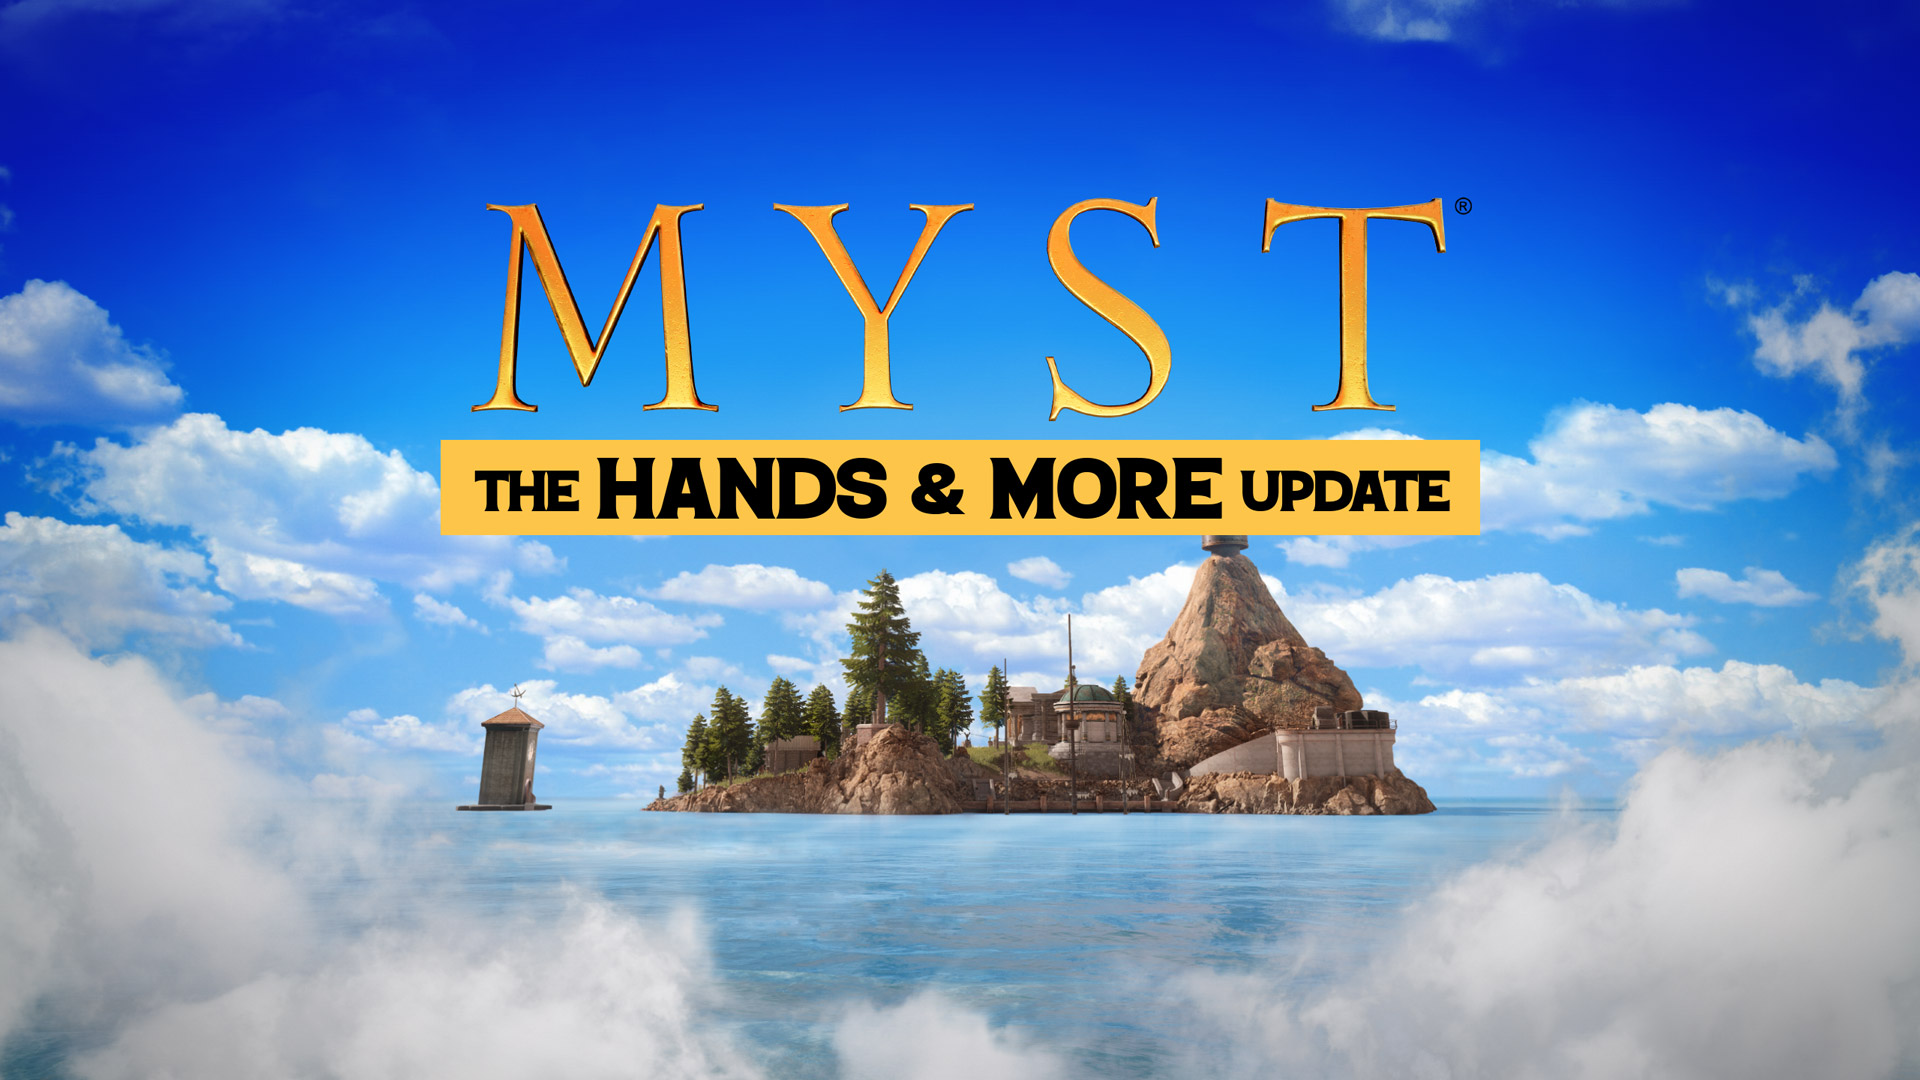 The Design & Implementation of Oculus Quest Hand-tracking in Myst